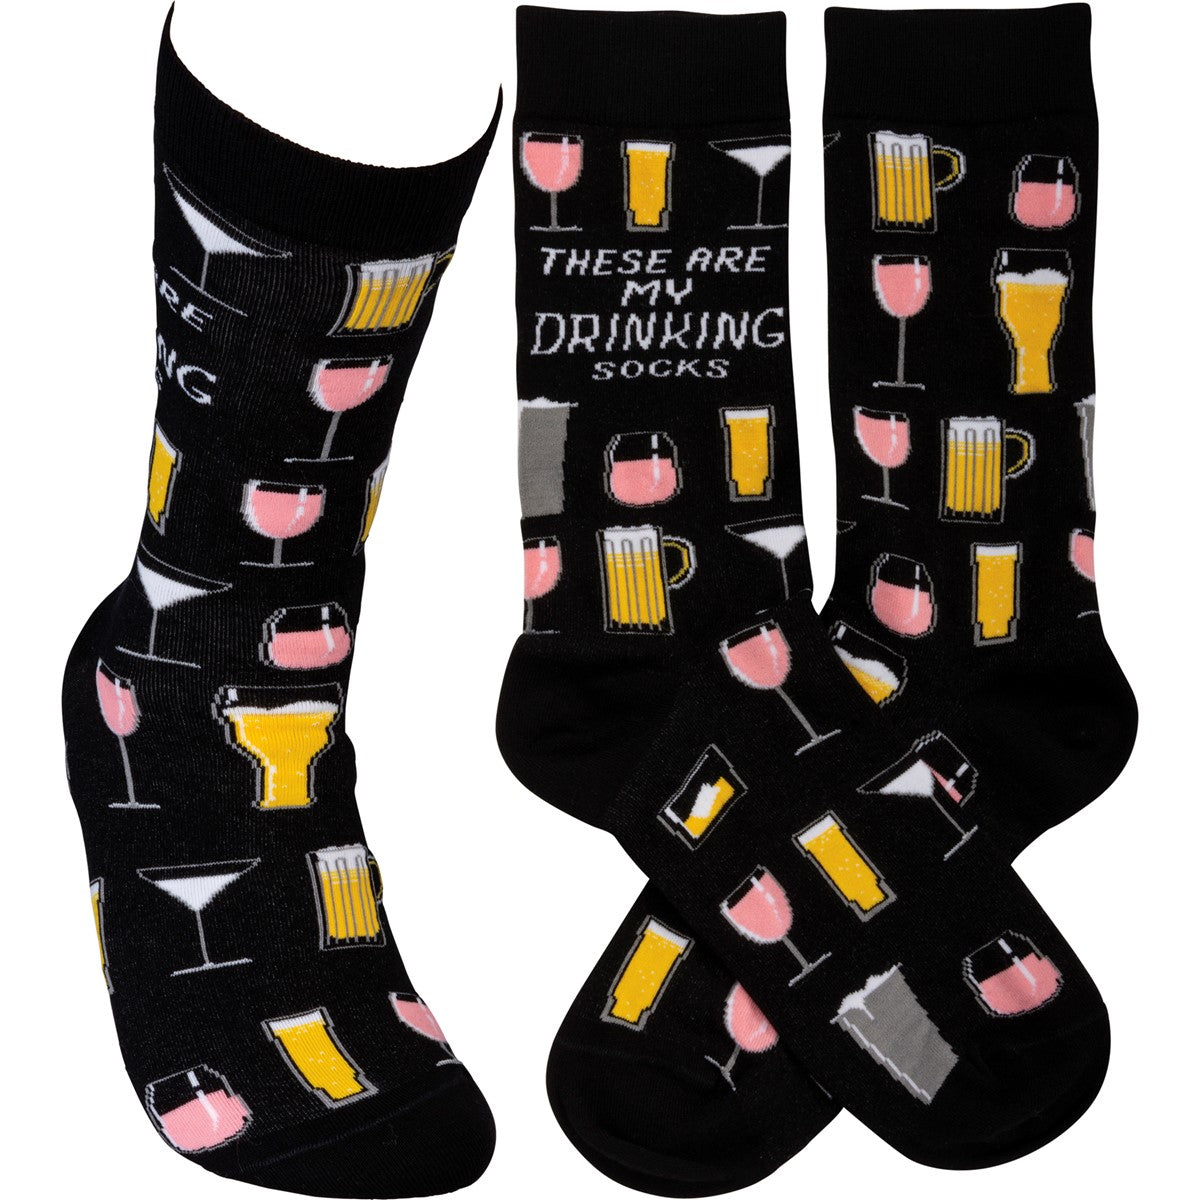 "THESE ARE MY DRINKING SOCKS" SOCKS